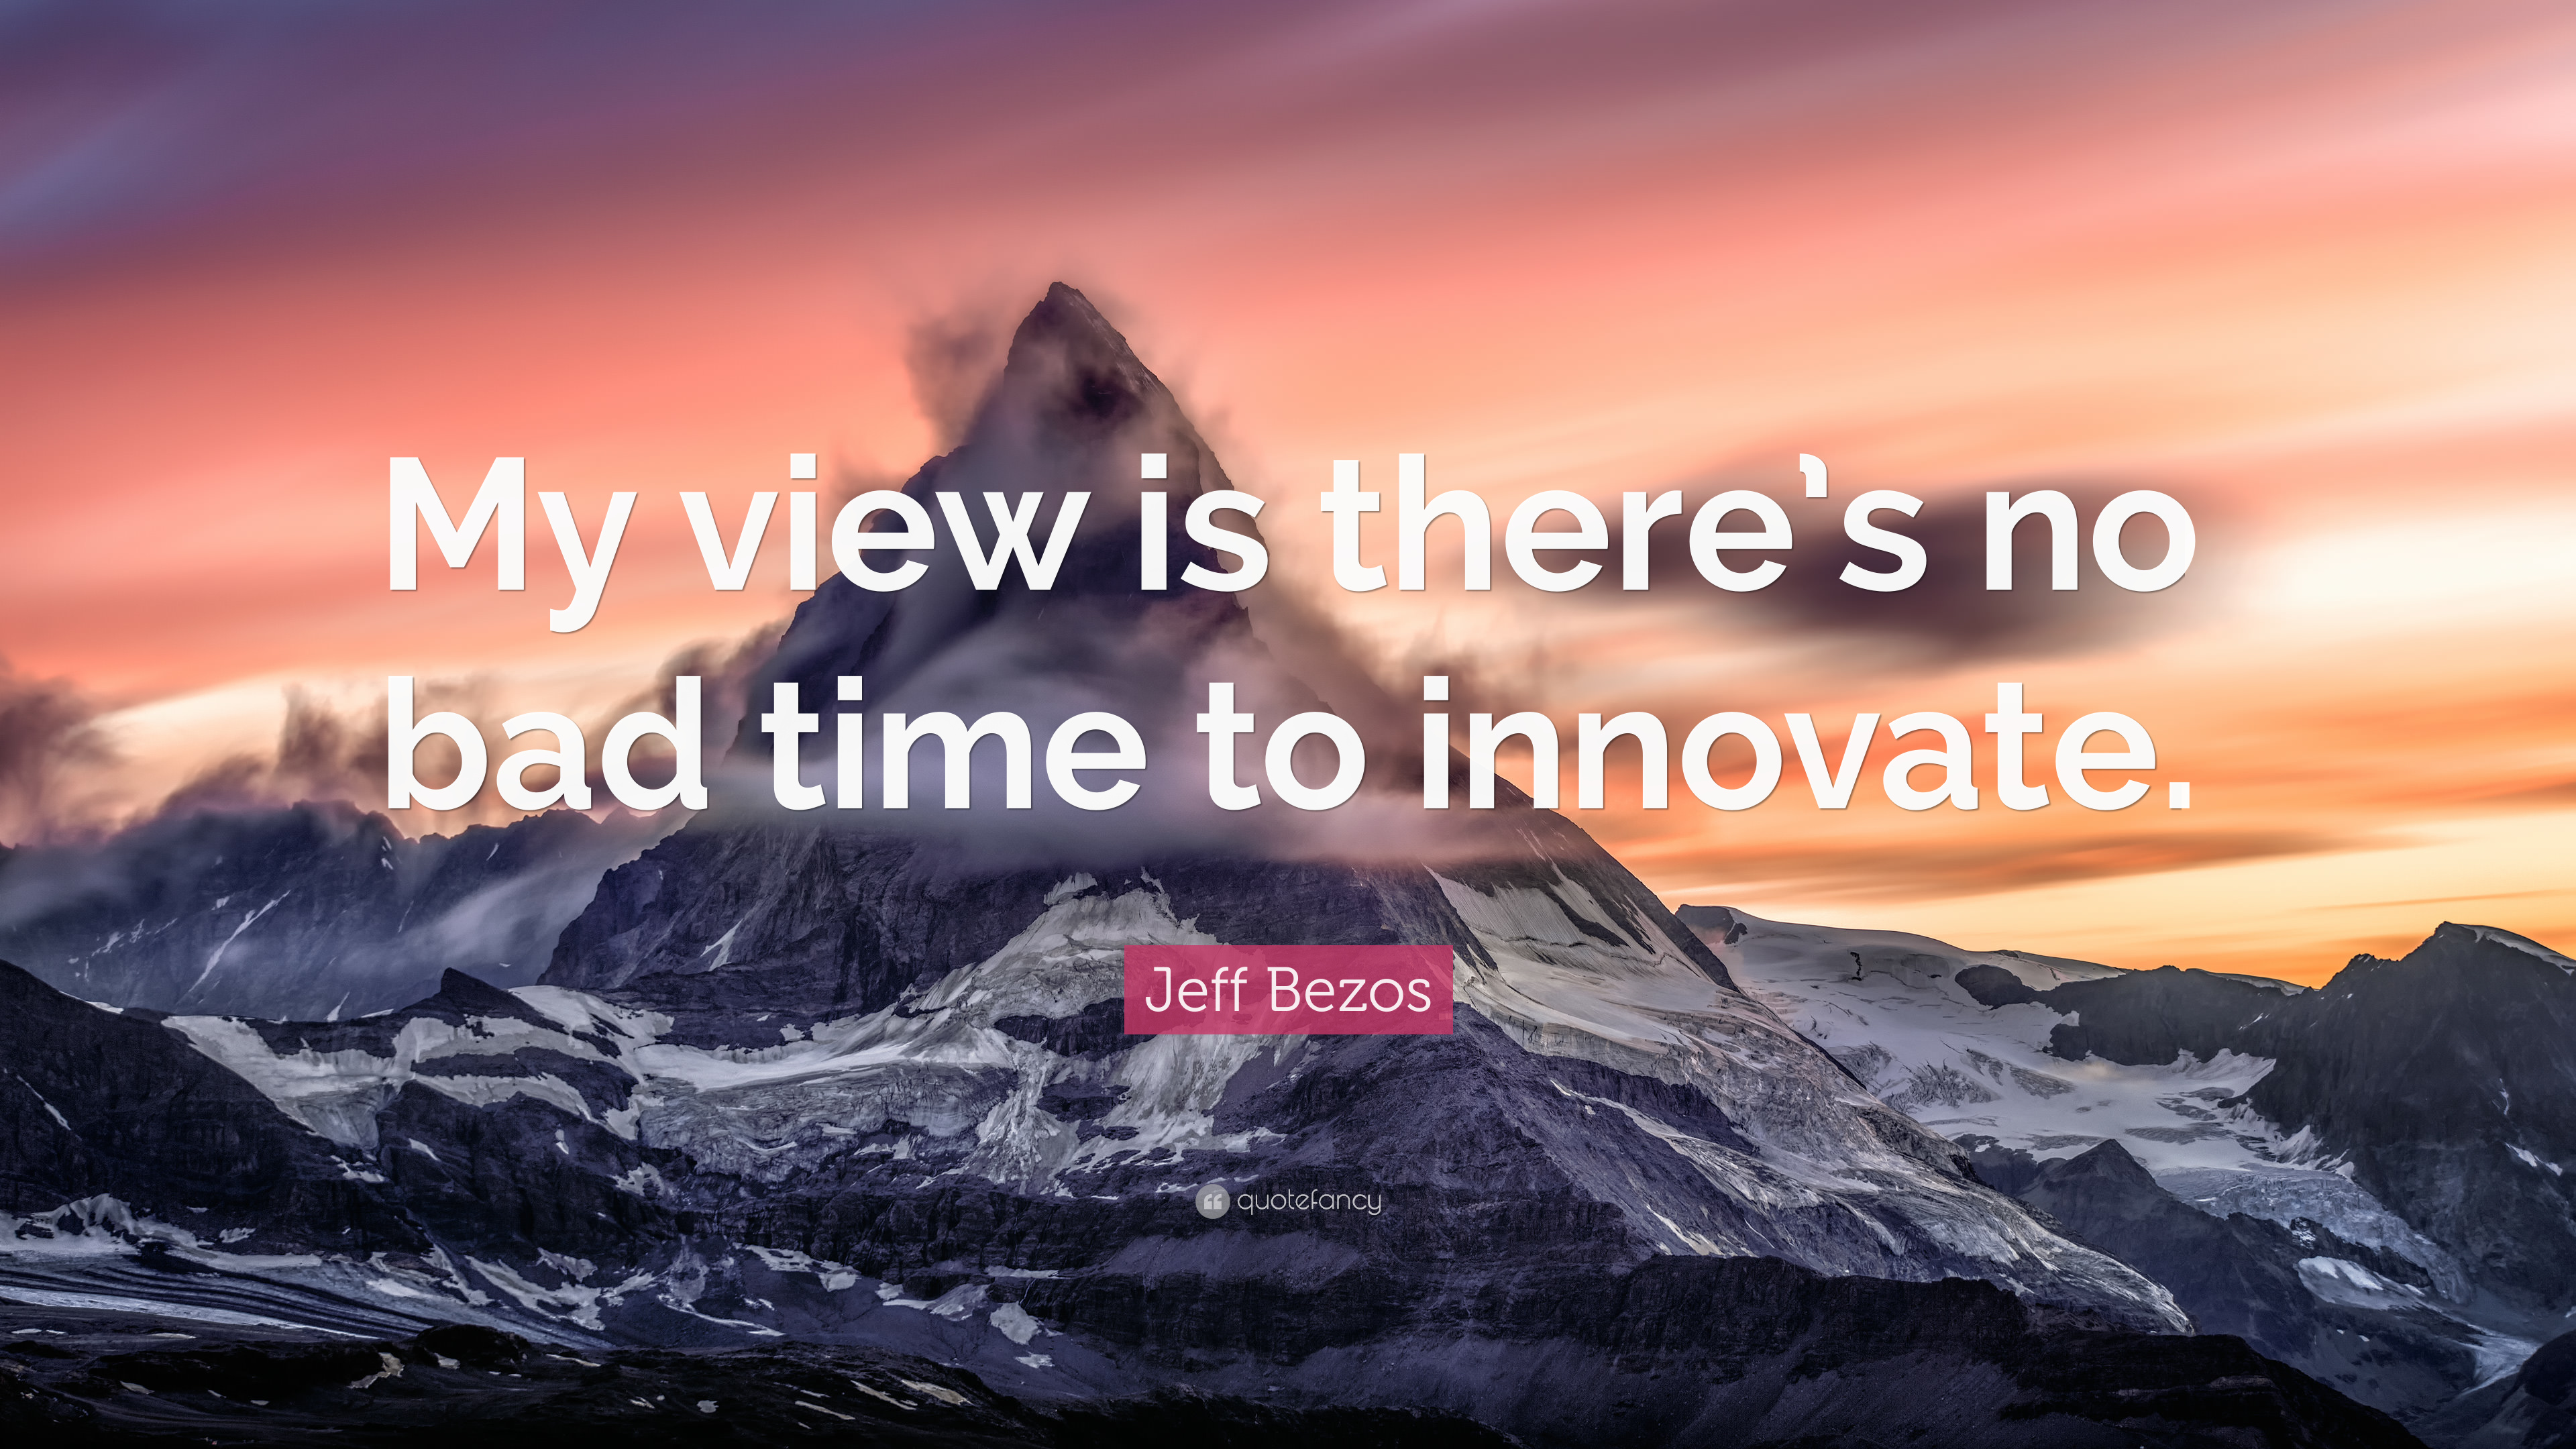 Jeff Bezos Quote: “My view is there's no bad time to innovate.” (12 ...